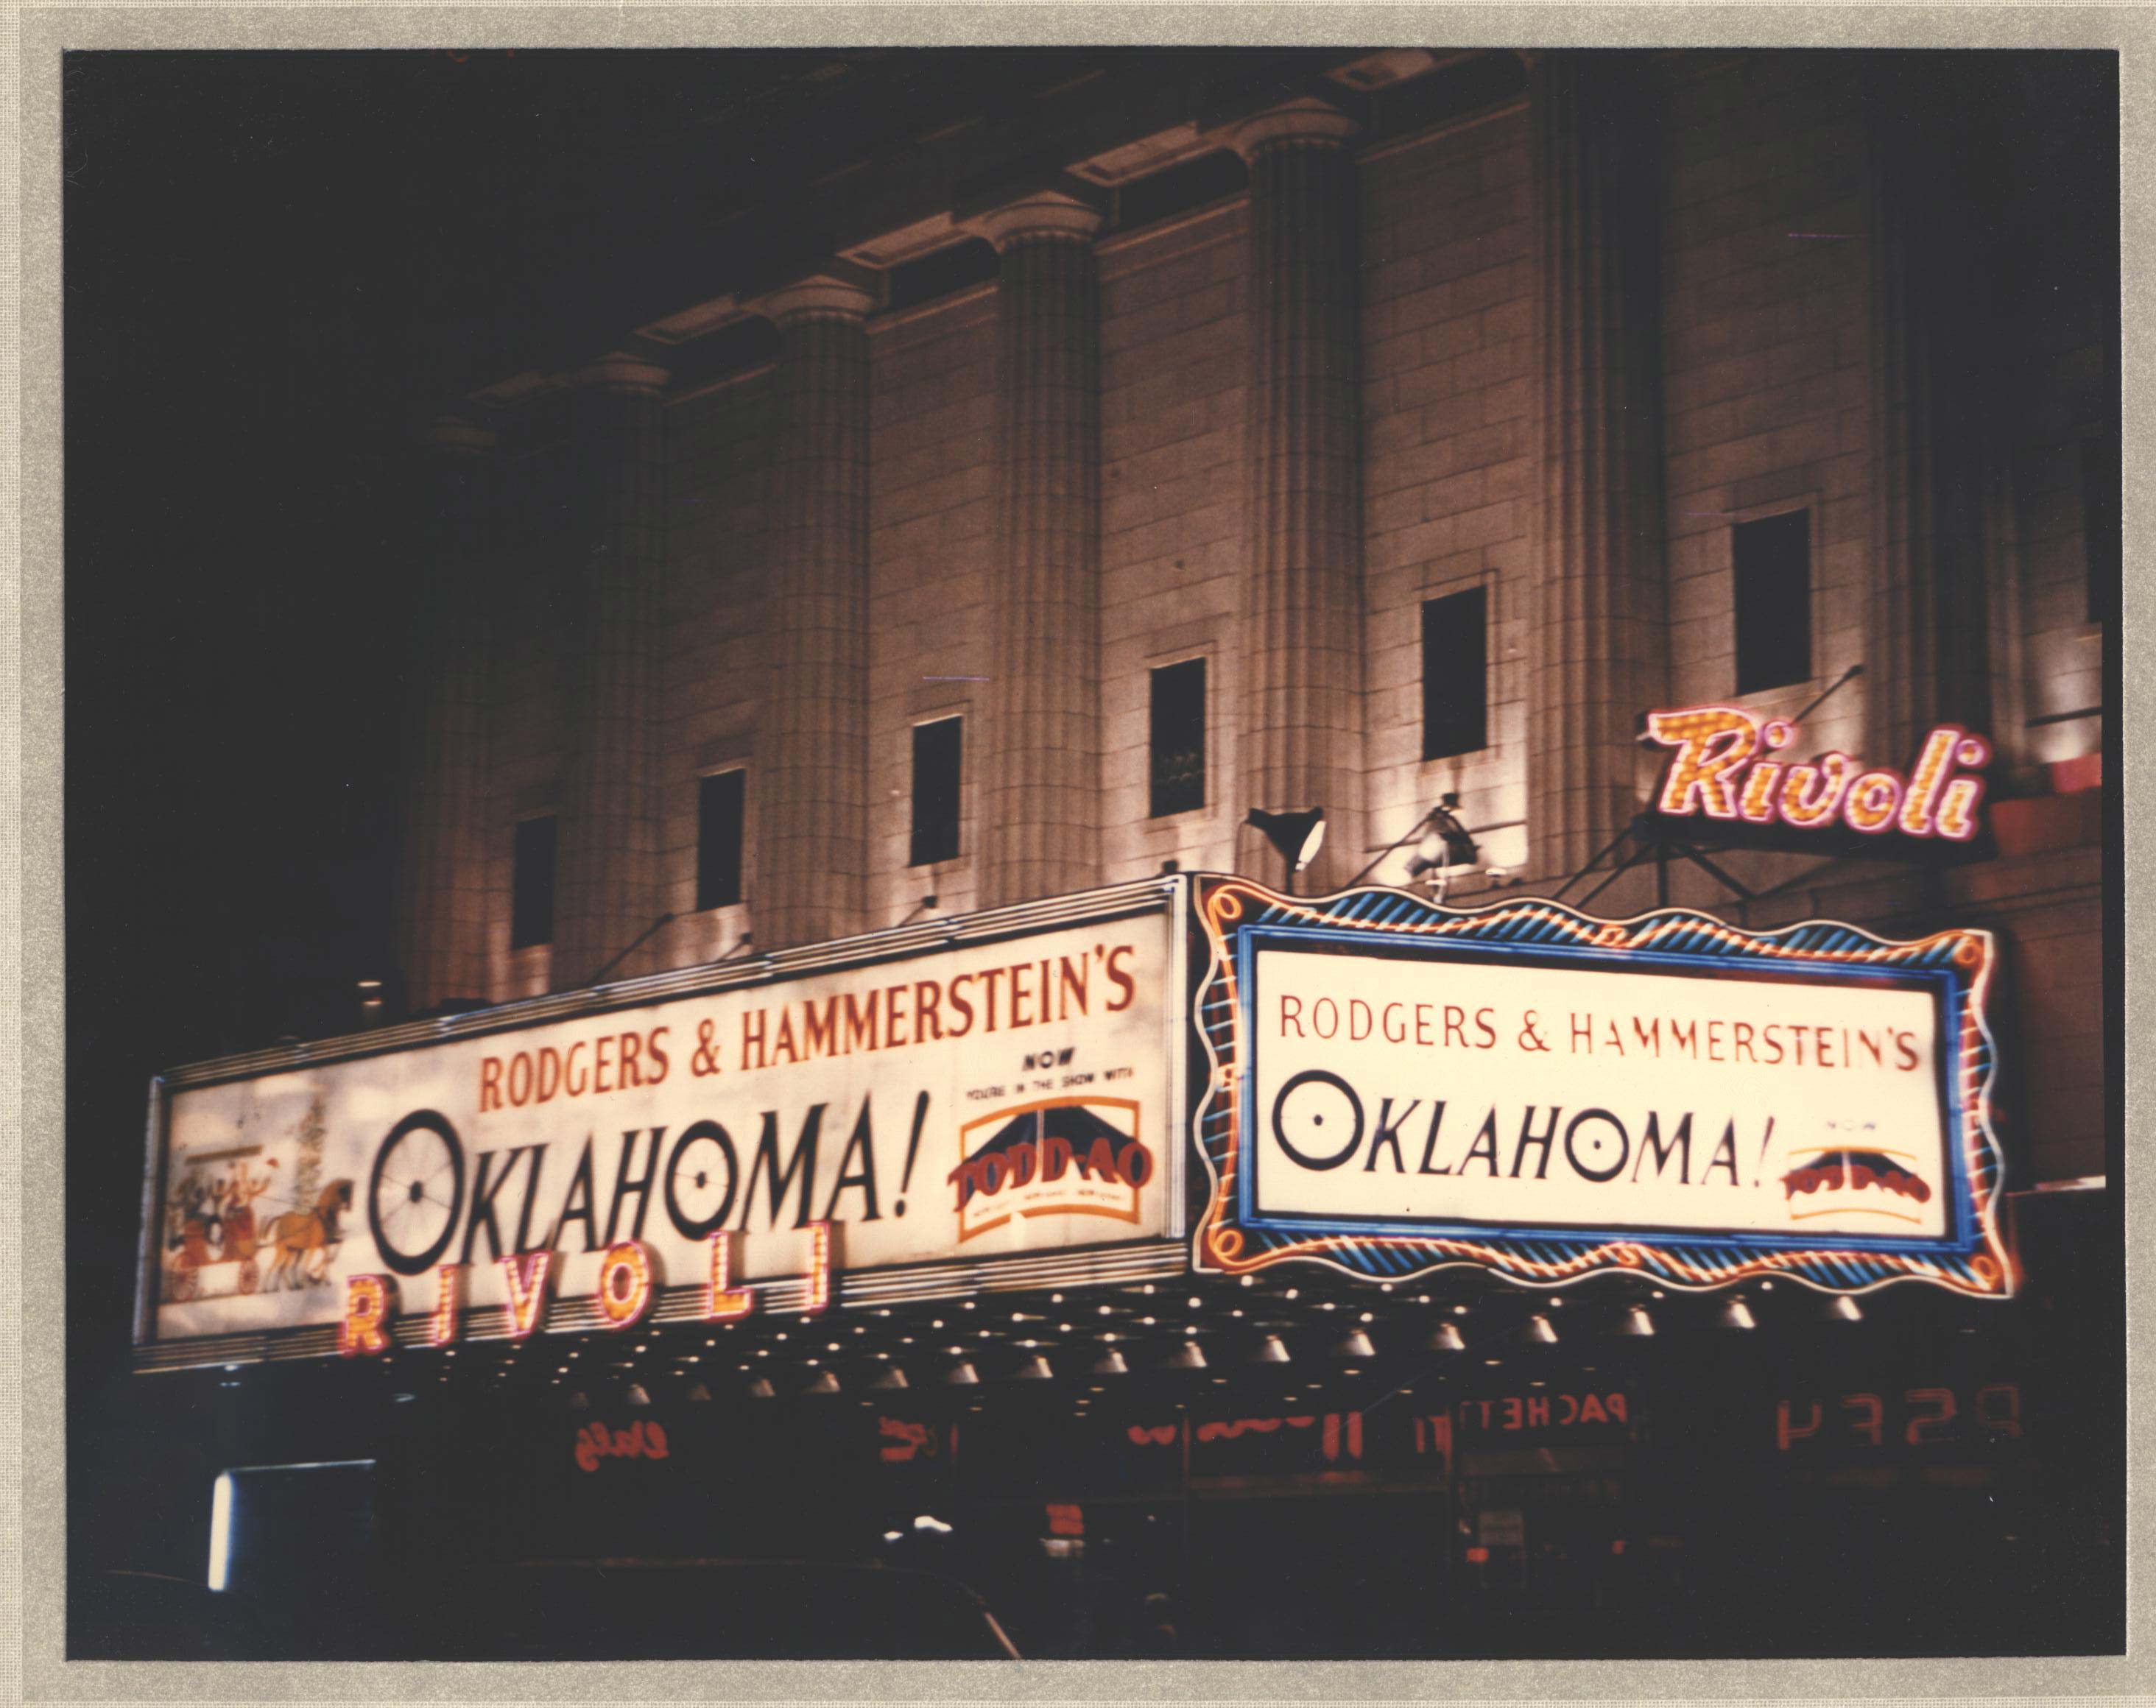 A marquee photo for the 1955 Oklahoma! film.